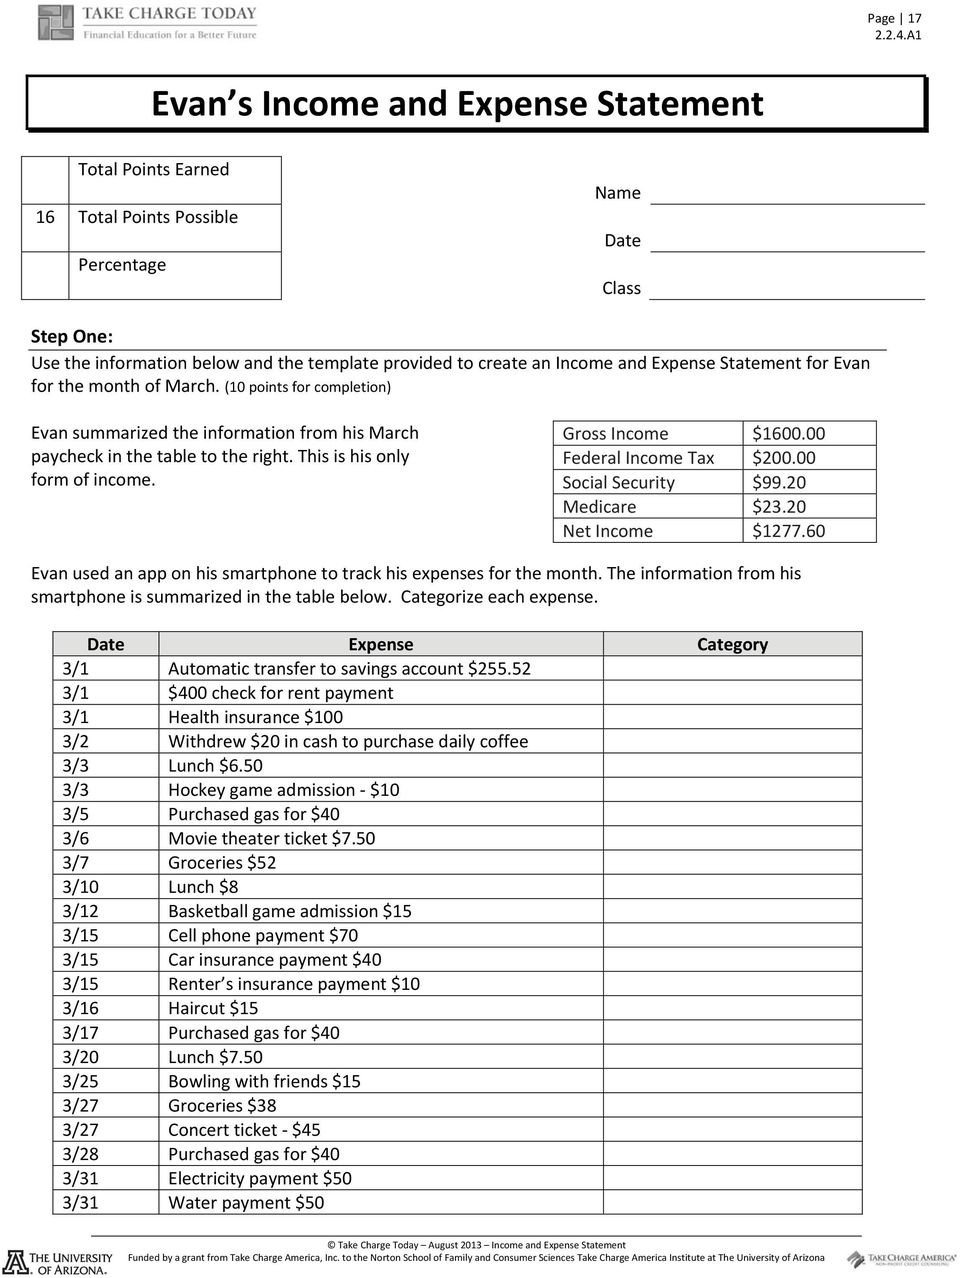 IN E AND EXPENSE STATEMENT PDF